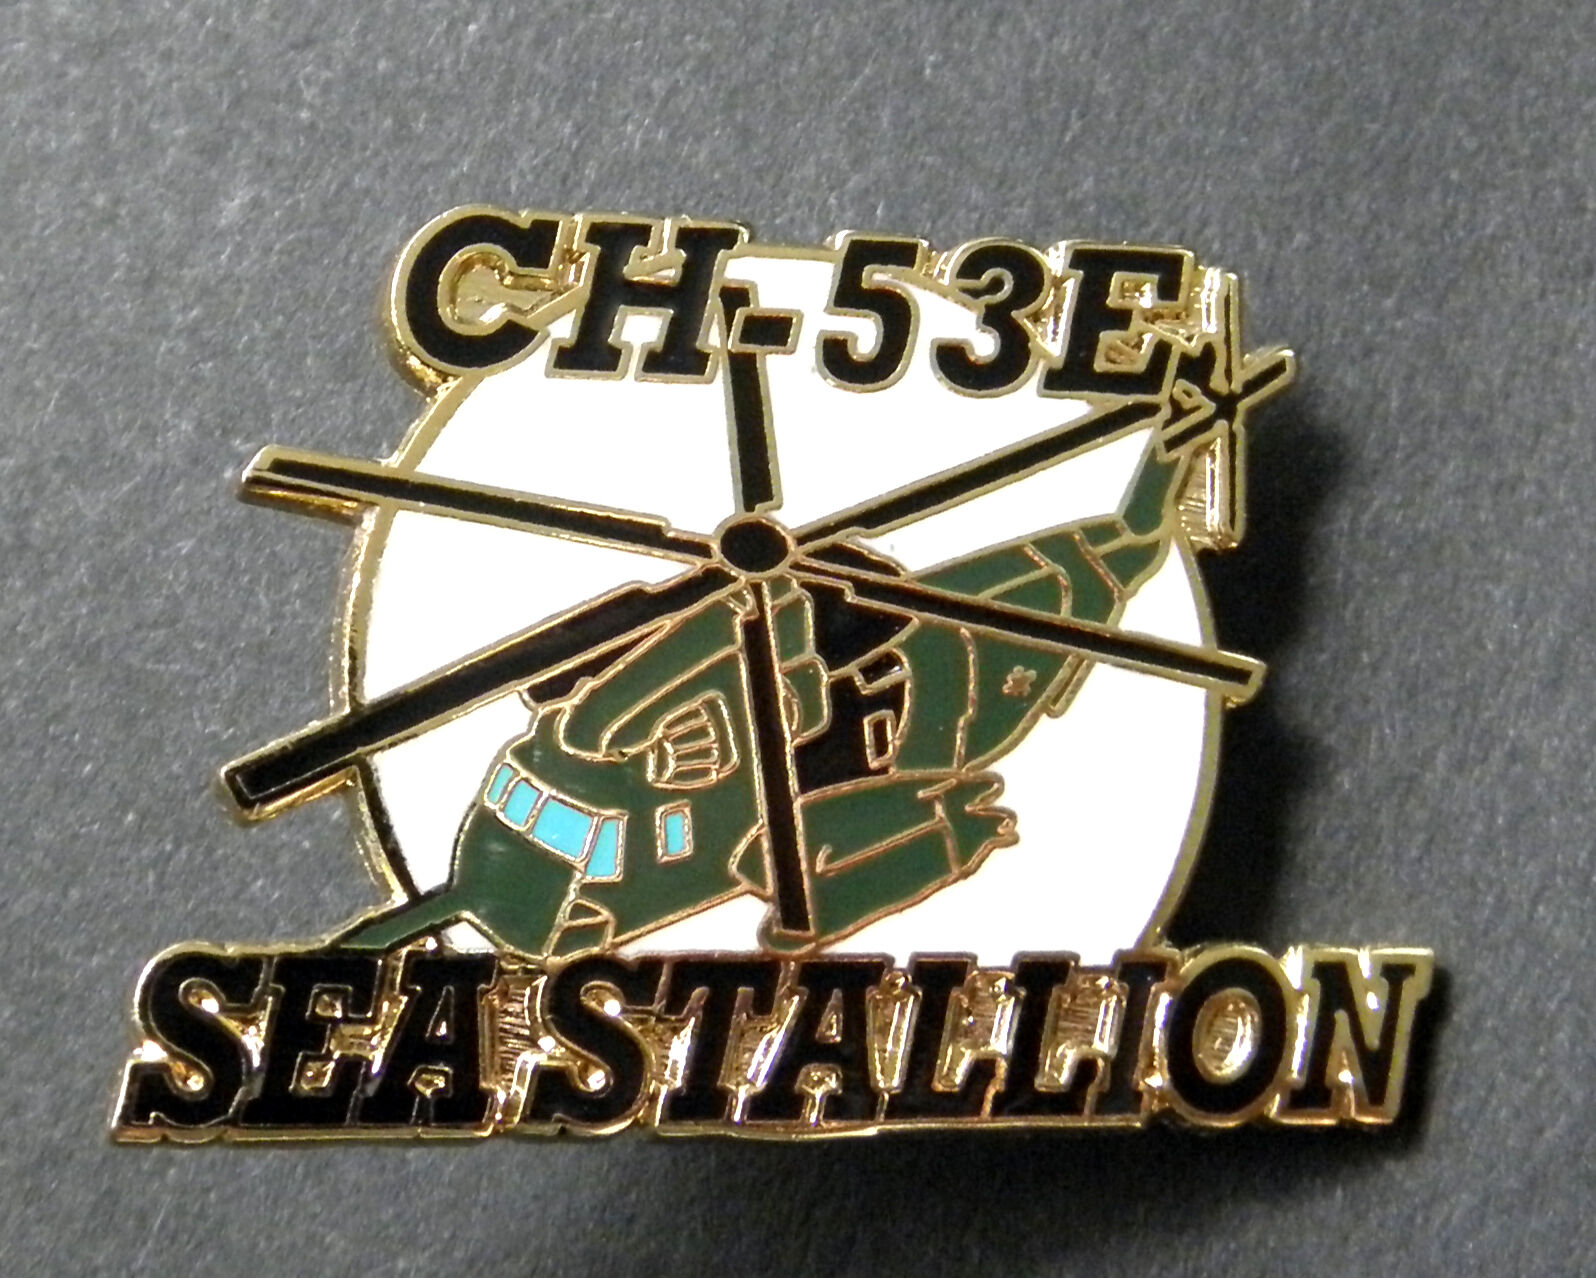 SEA STALLION SIKORSKY CH-53 E HELICOPTER LAPEL PIN BADGE 1.5 INCHES